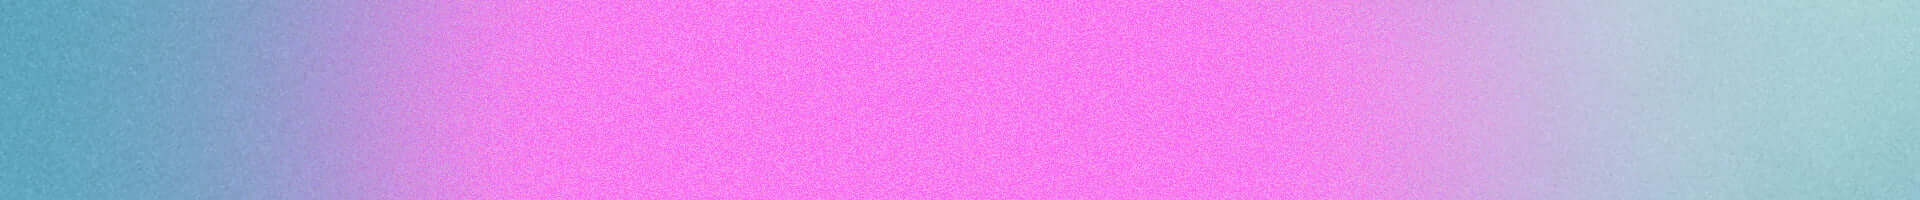 Blue and pink background.